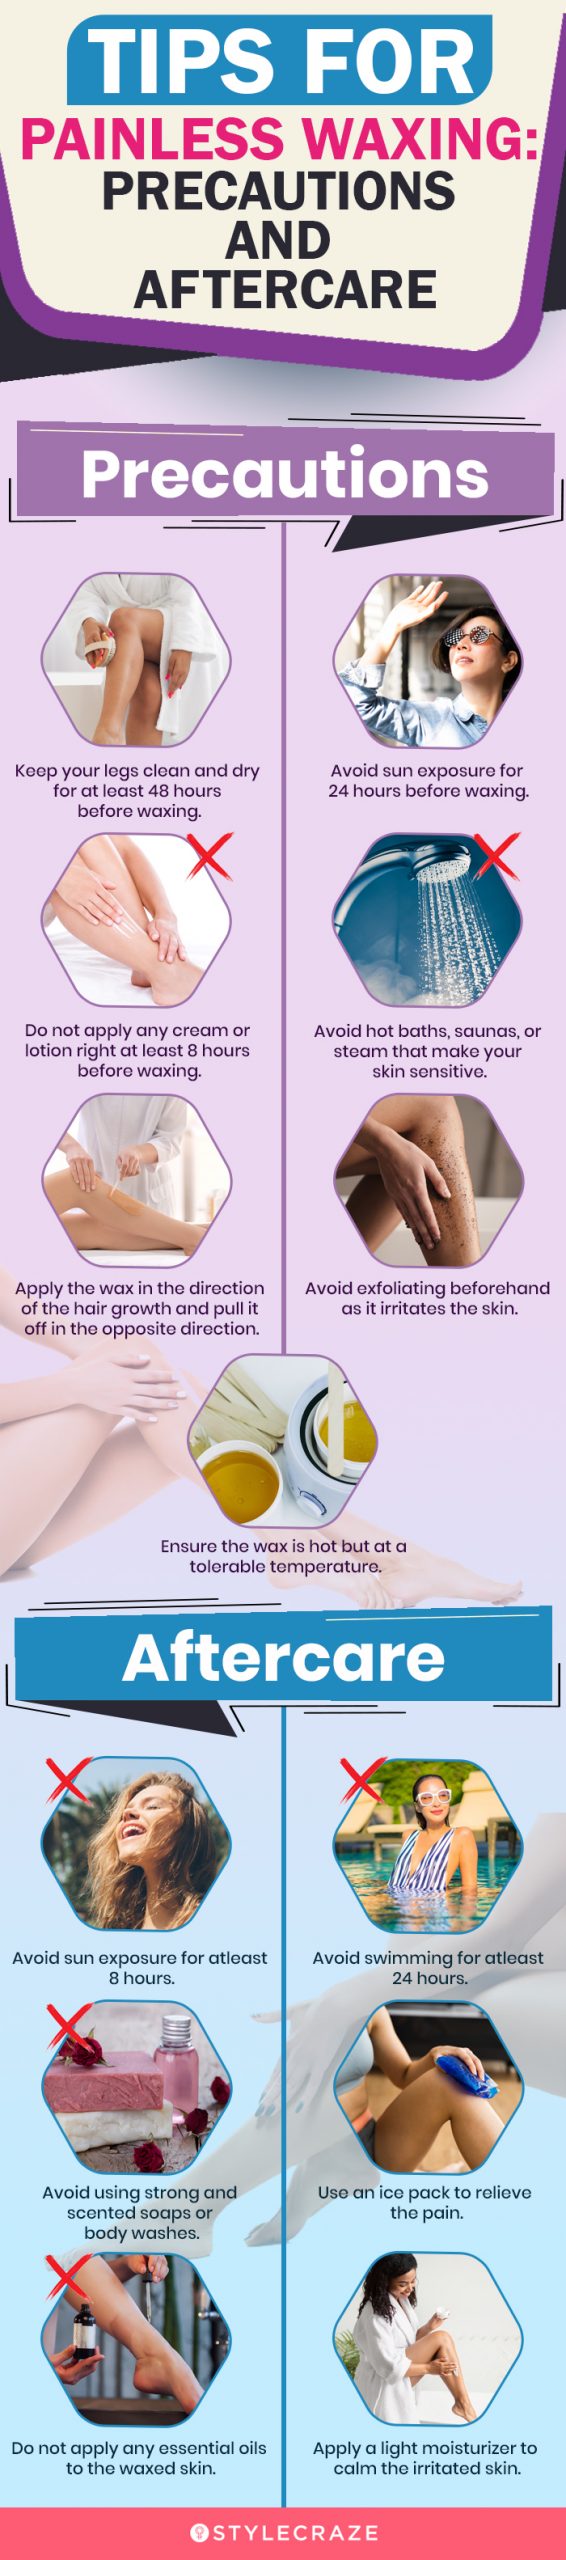 tips for painless waxing (infographic)